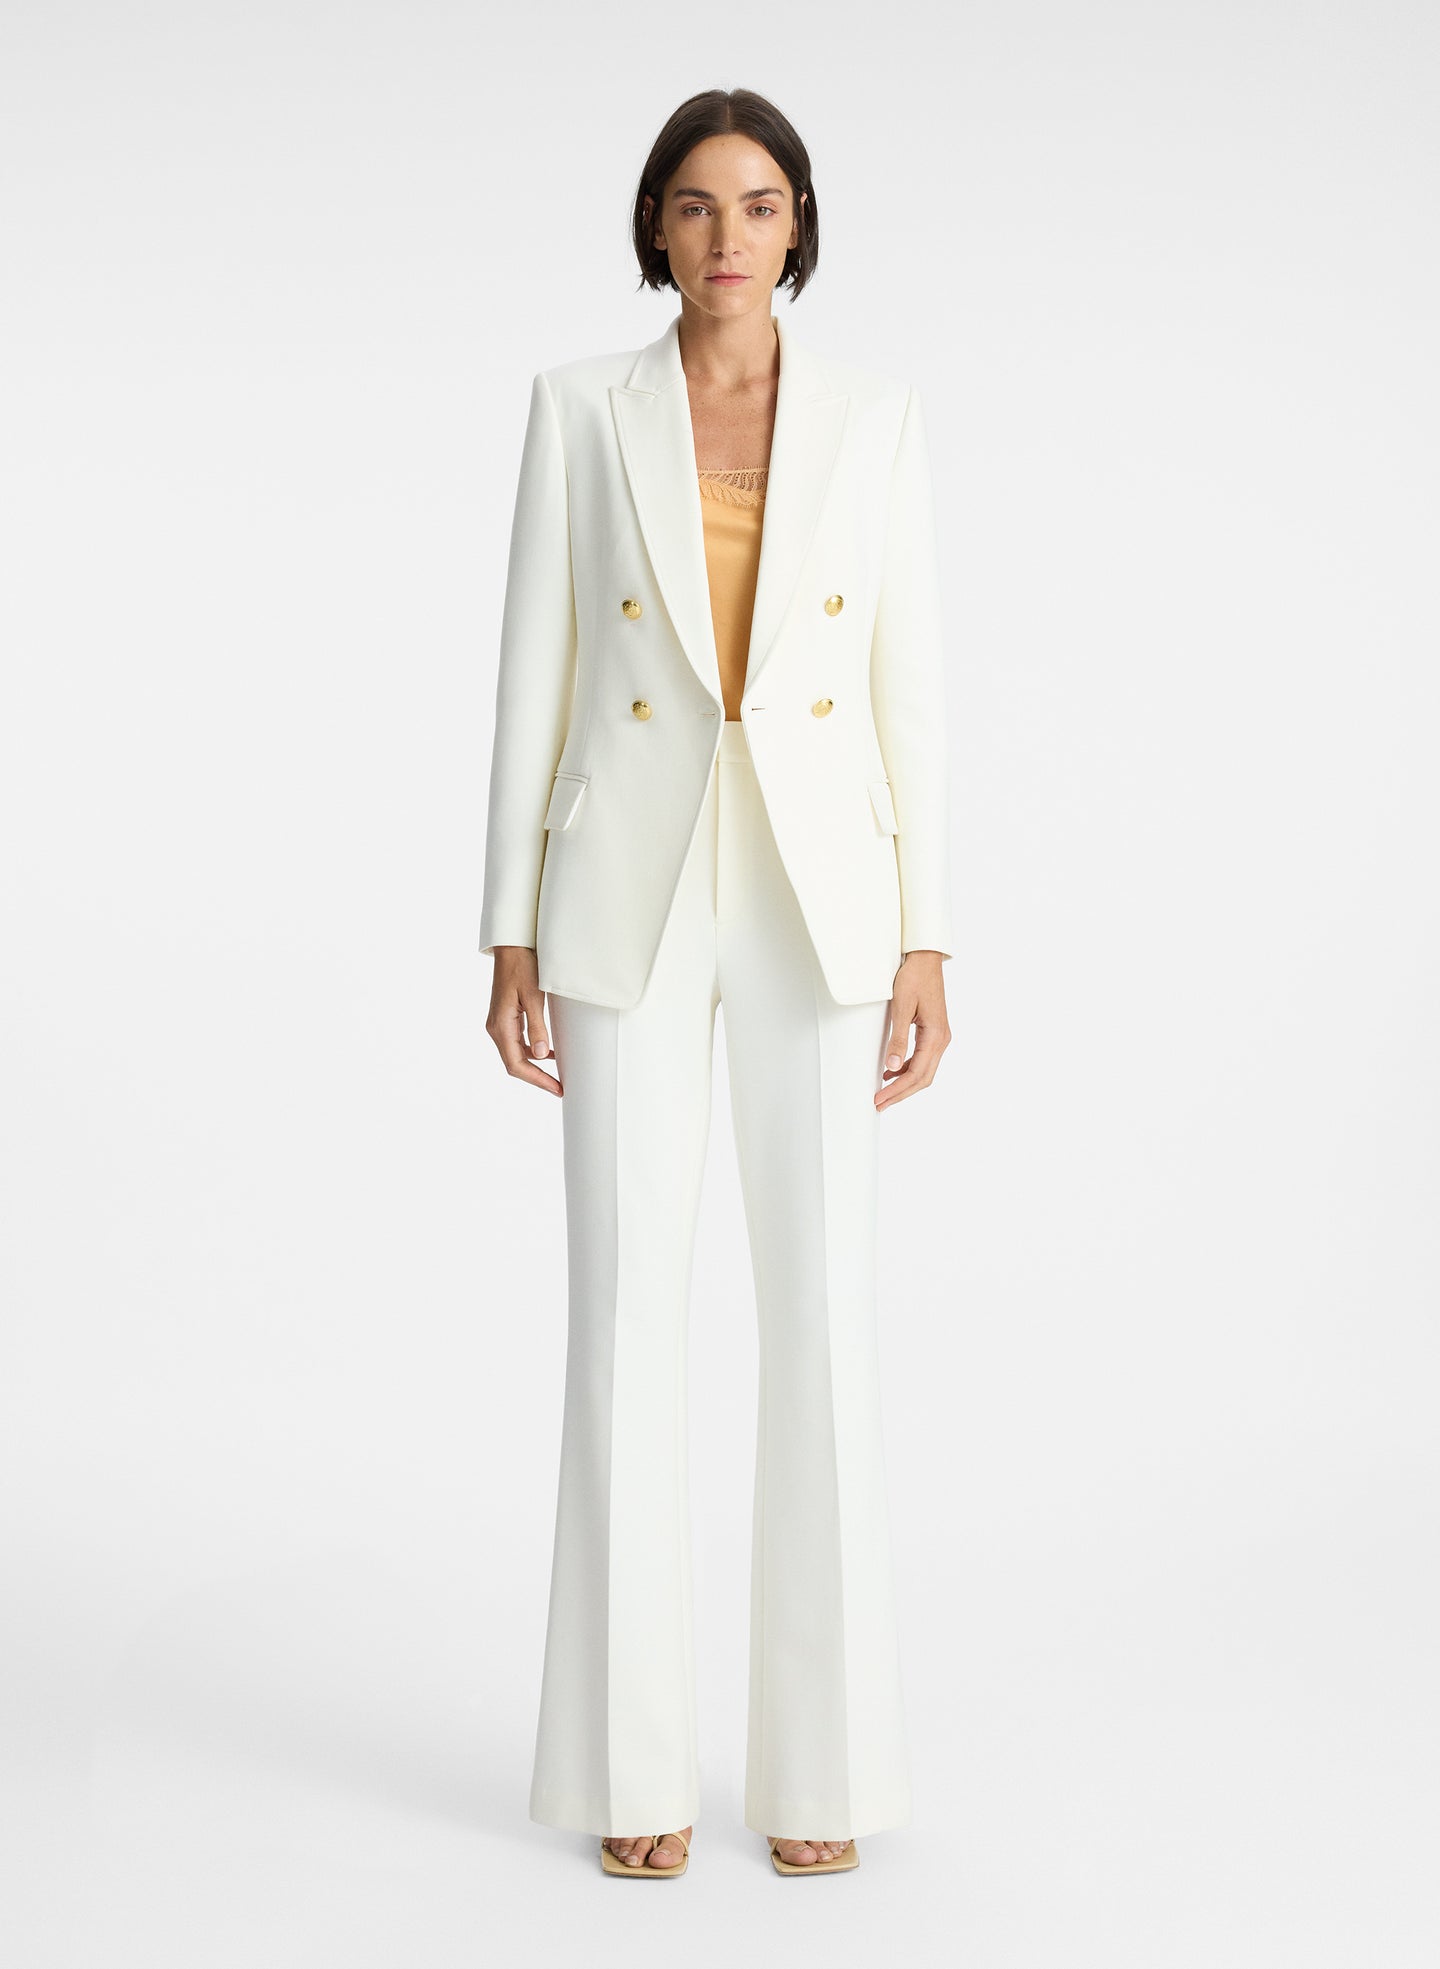 front view of woman wearing white blazer with gold buttons, beige camisole, and white pants